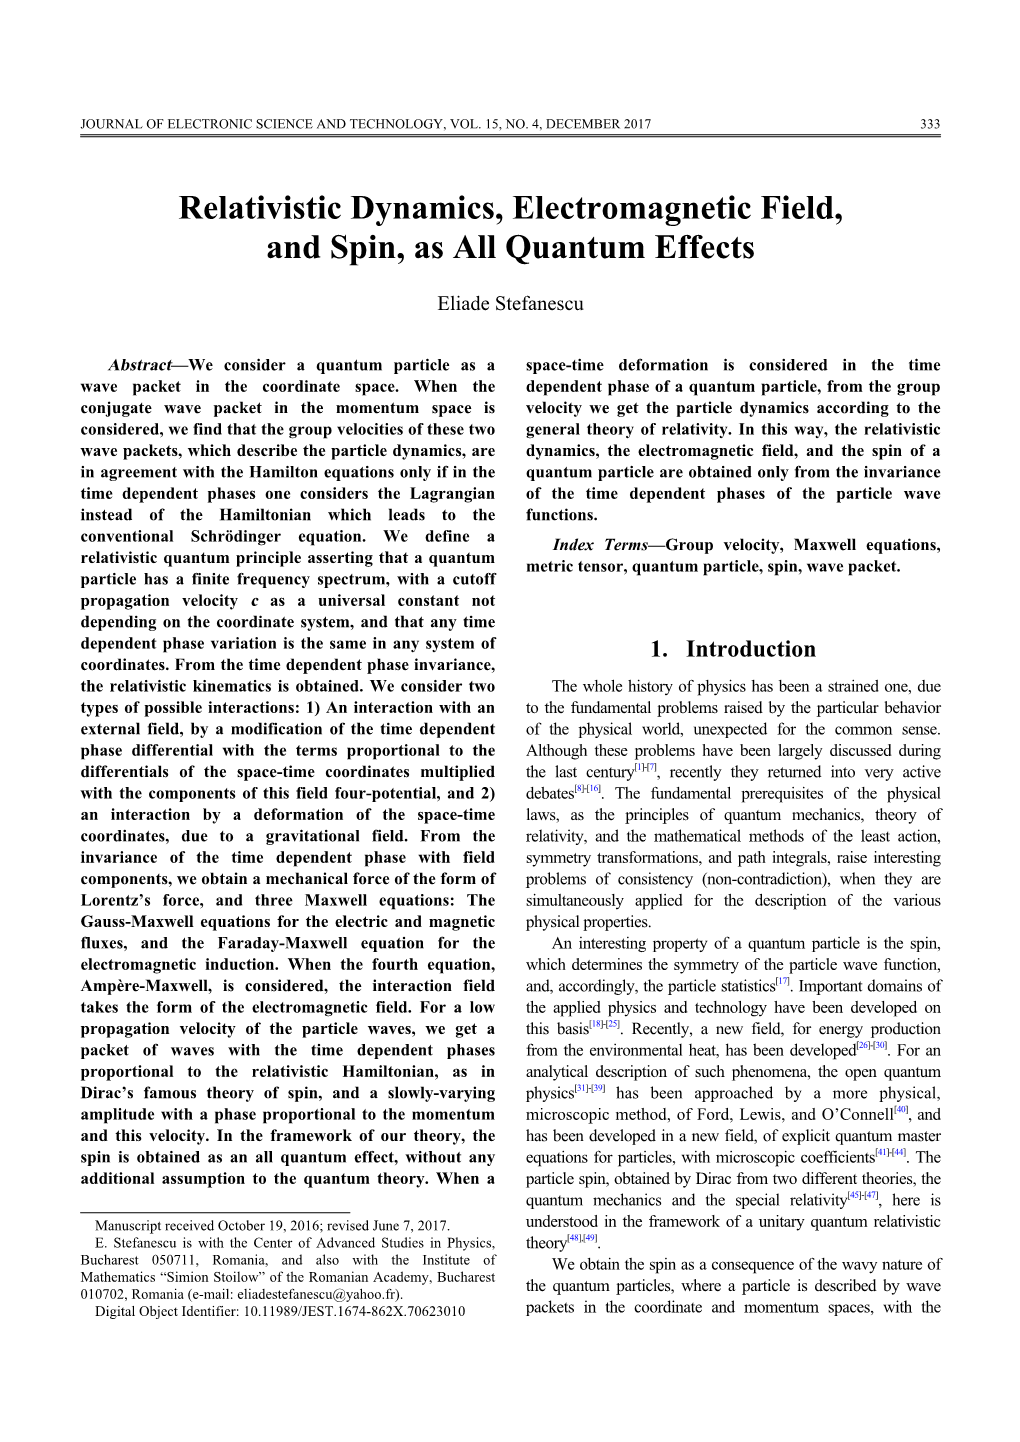 Relativistic Dynamics, Electromagnetic Field, and Spin, As All Quantum Effects